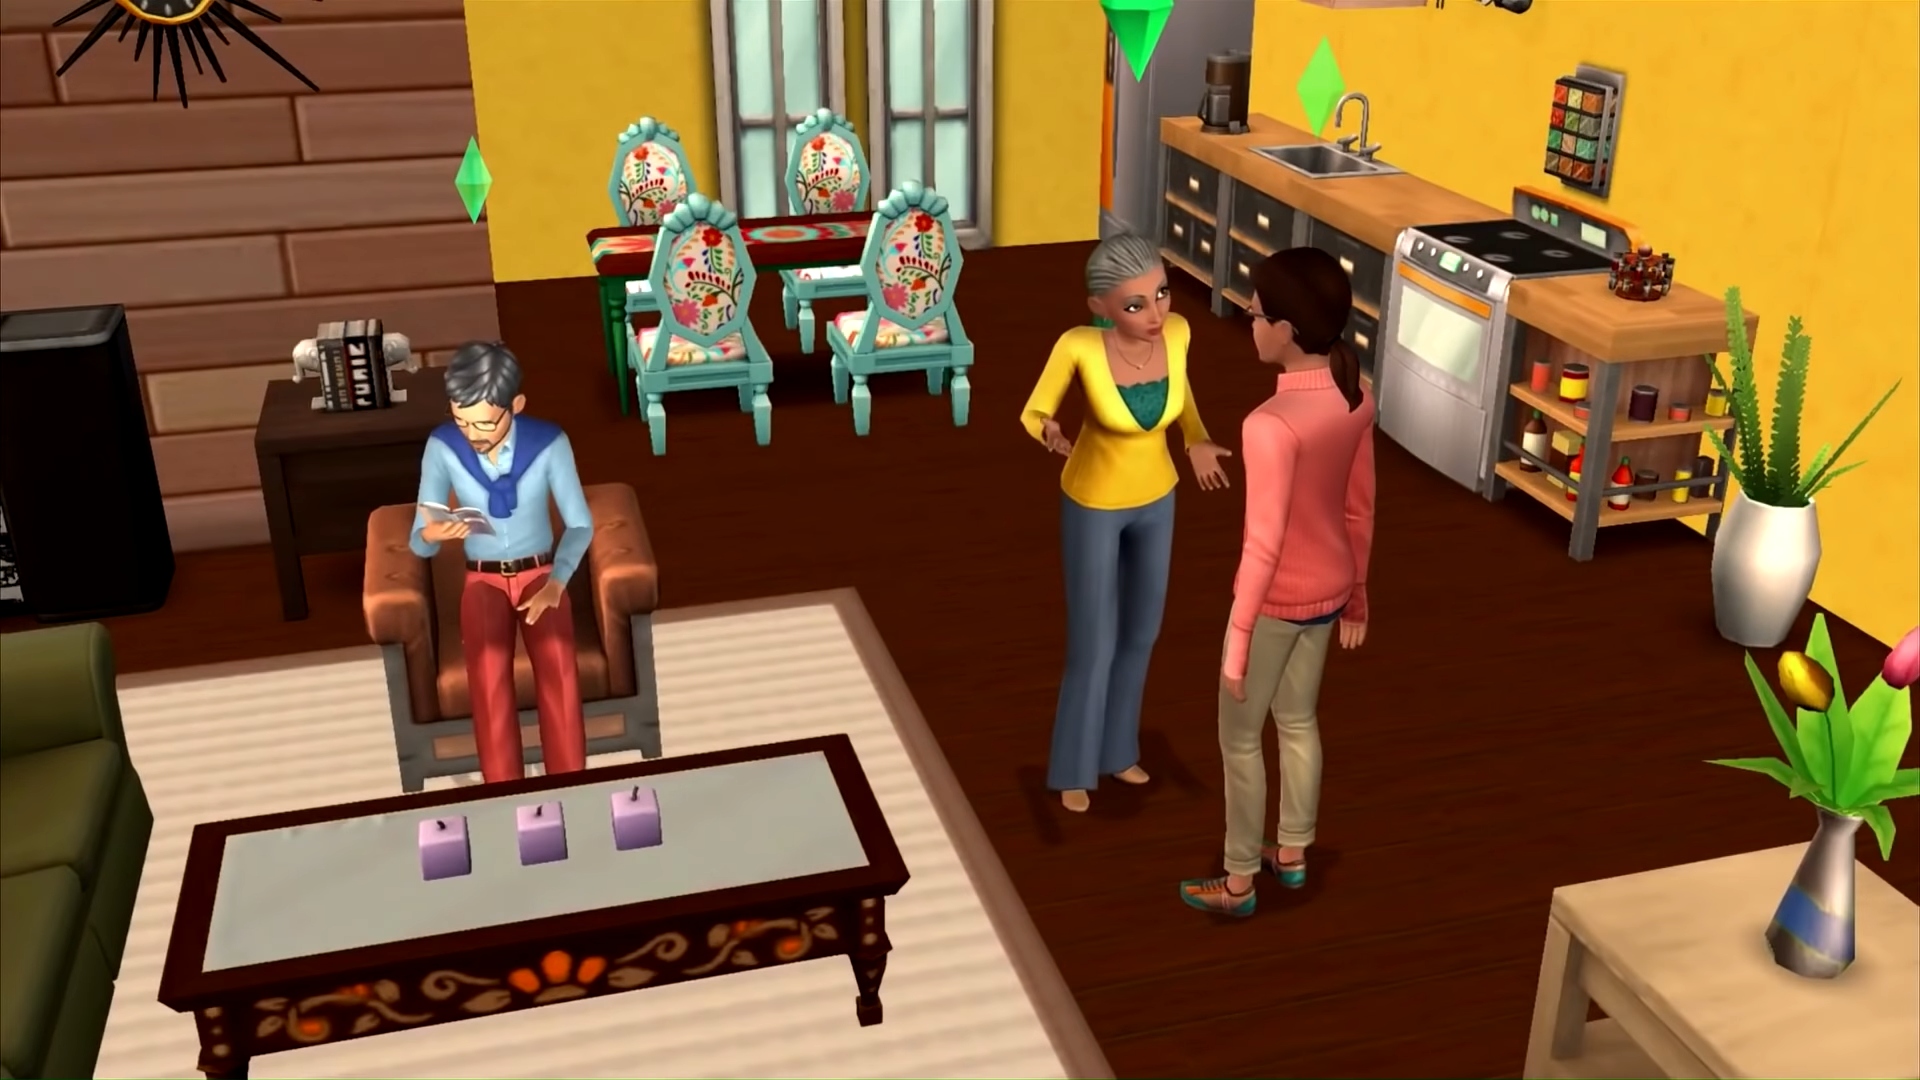 Best PC games for mobile devices: The Sims Mobile.  The screenshot shows a group of three Sims hanging out in the house.  One is sitting, two are standing.